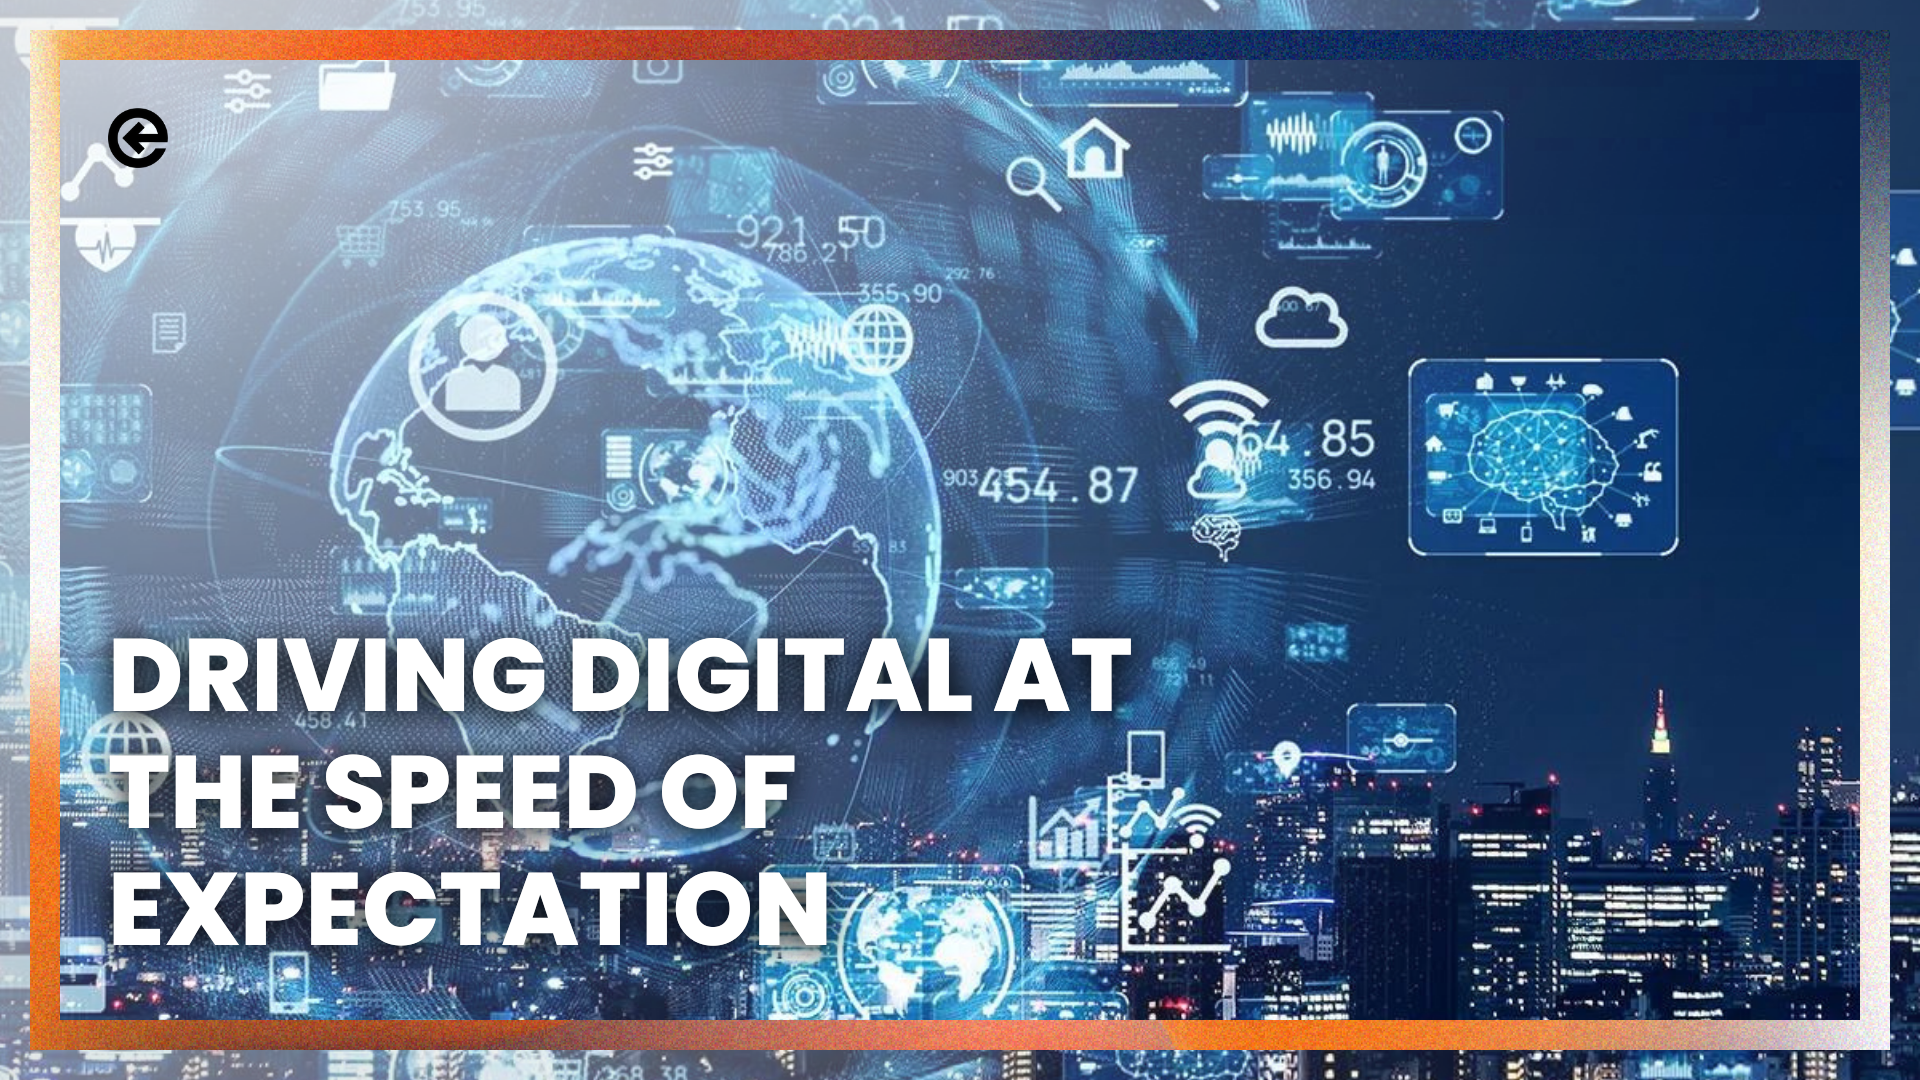 Driving Digital at the Speed of Expectation